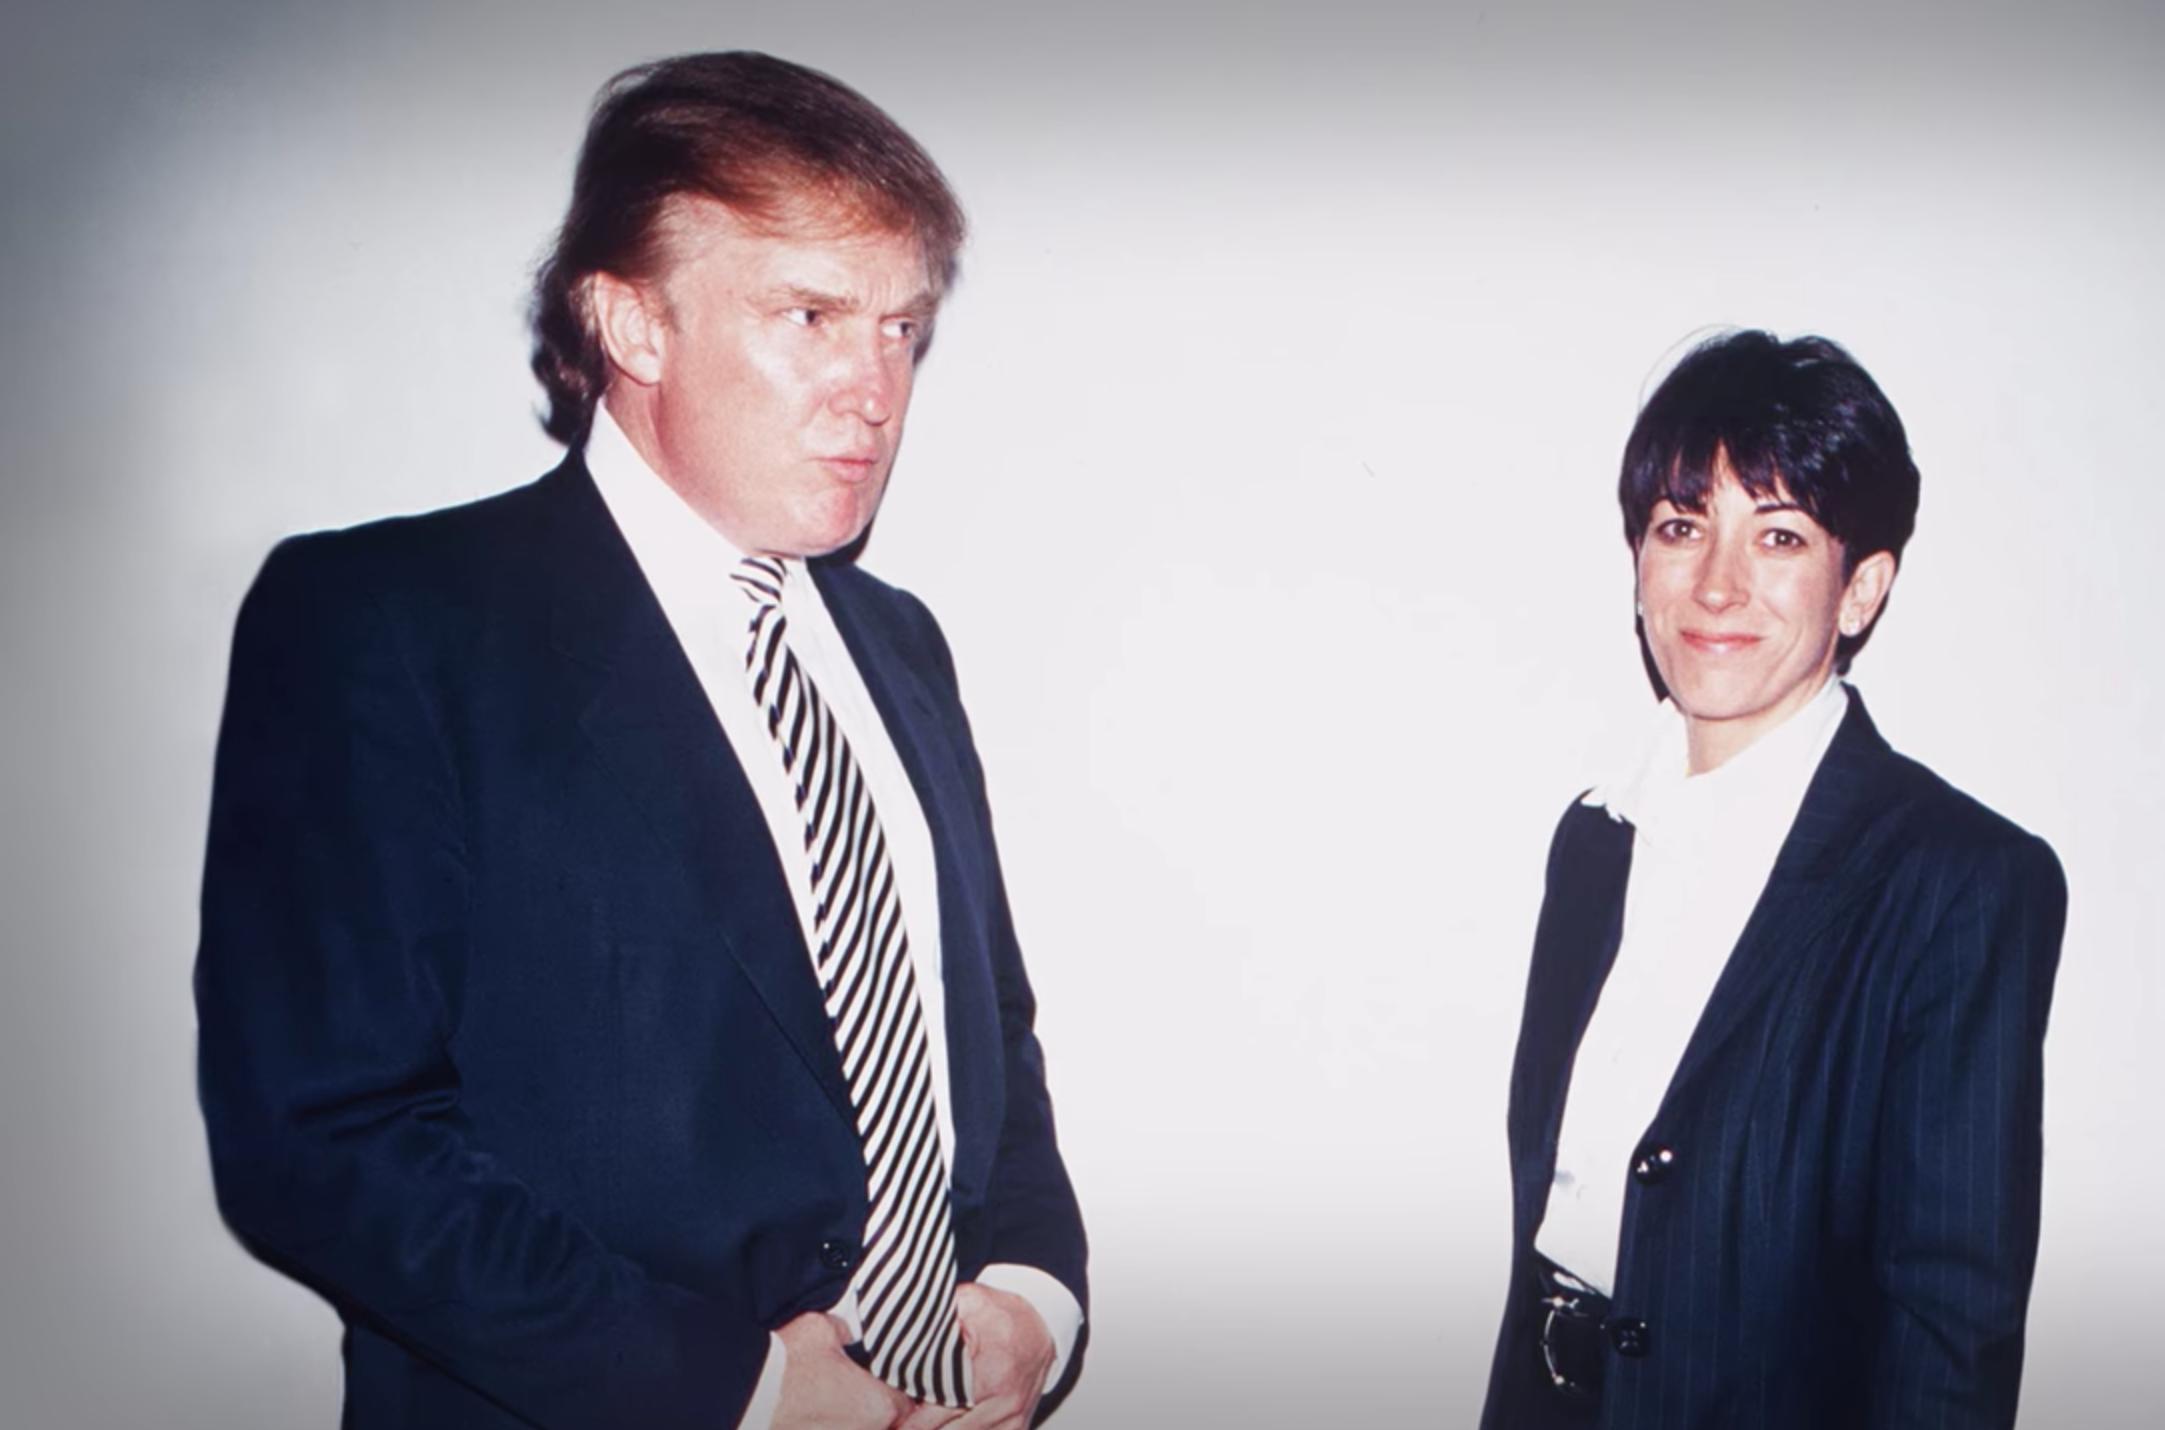 Donald Trump and Ghislaine Maxwell in Jeffrey Epstein: Filthy Rich (2020)